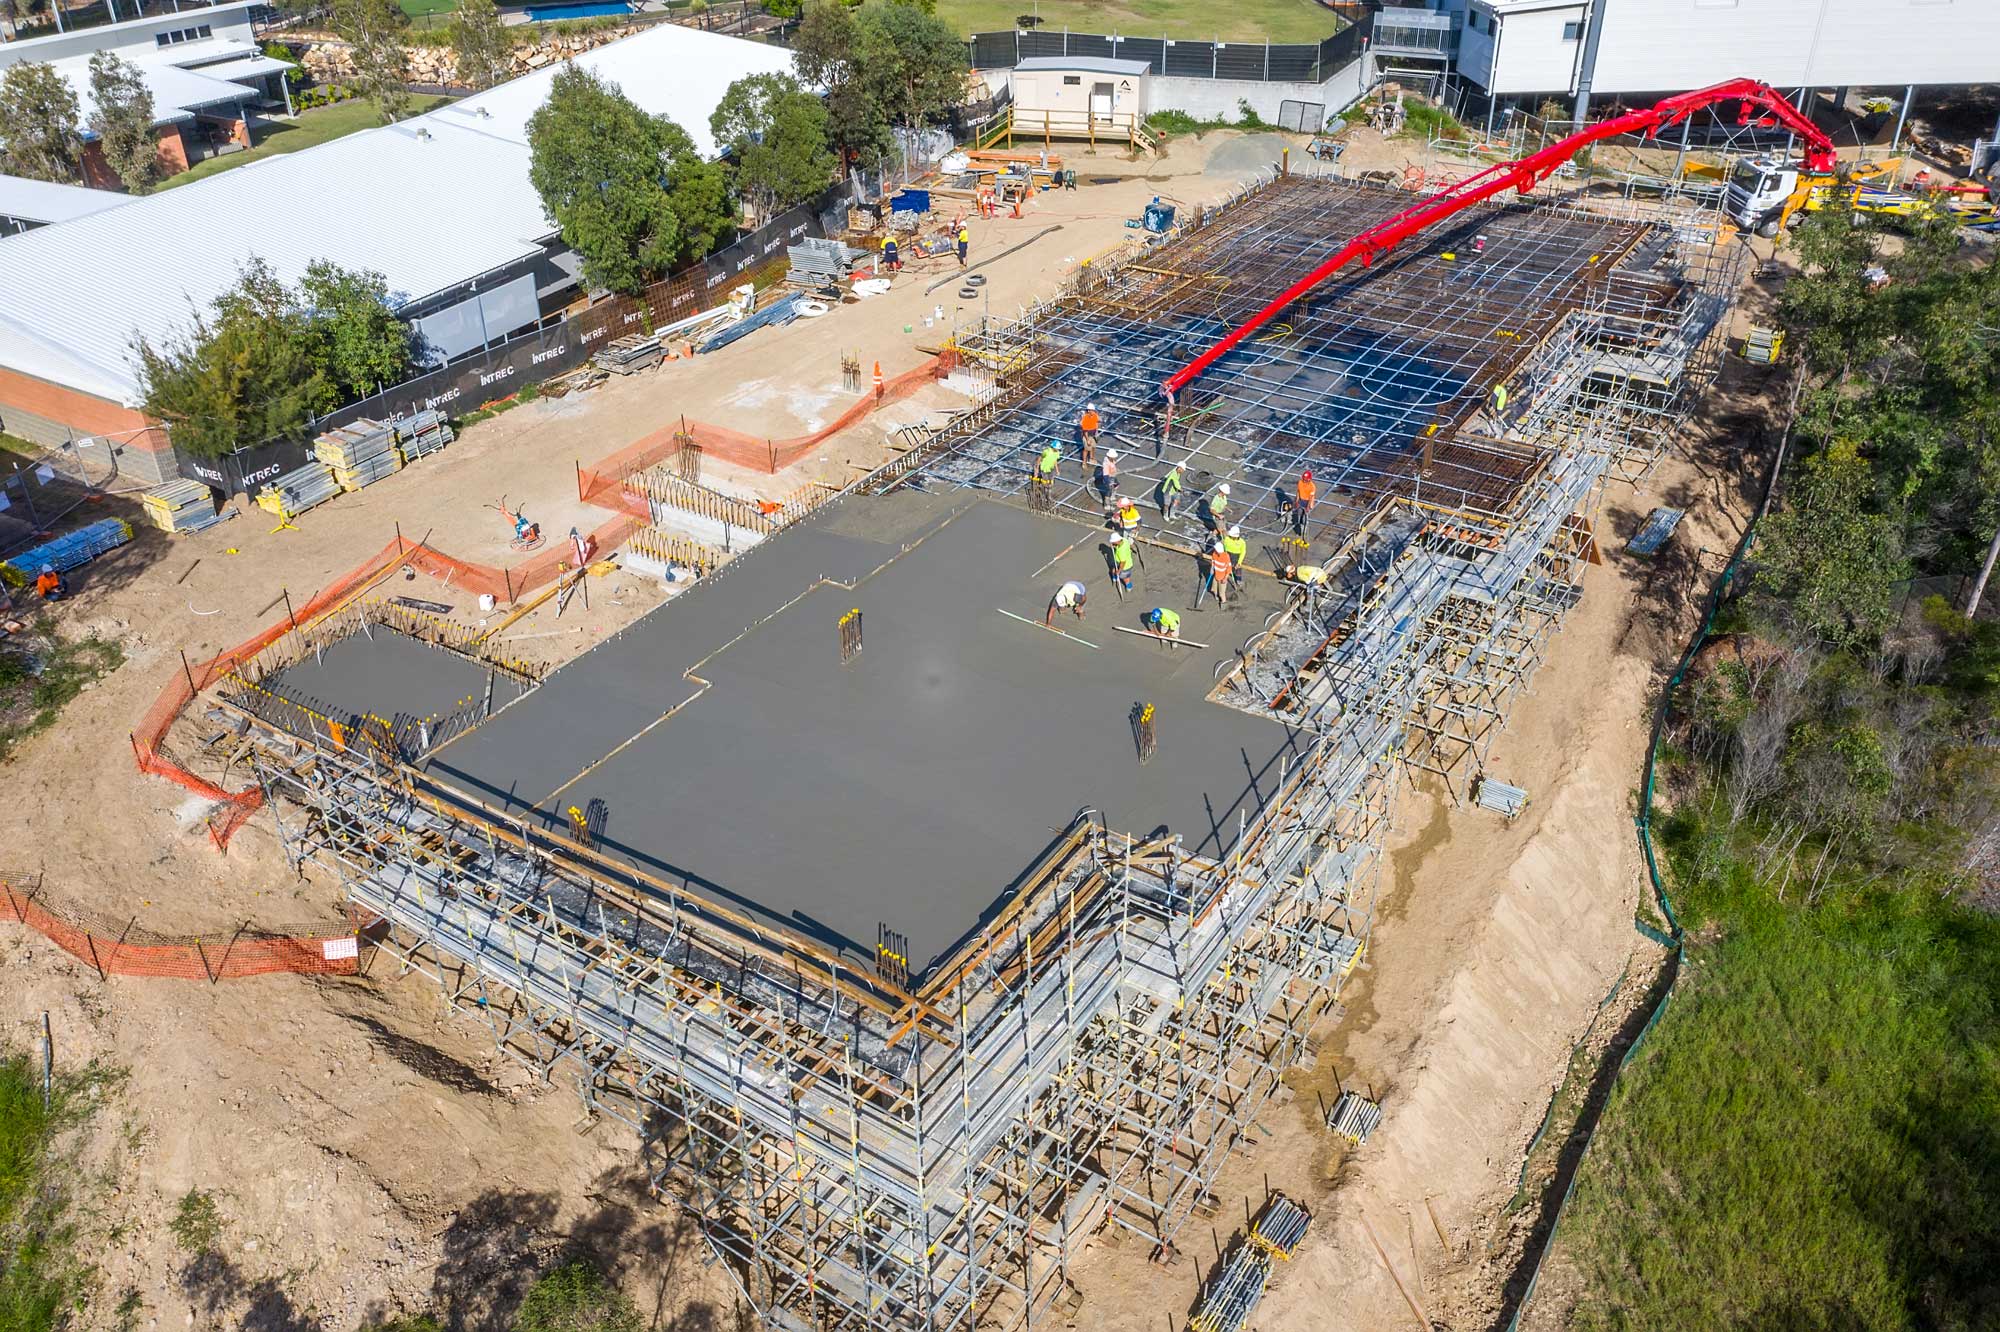 The Mavic2Pro drone at 30 metres captures the scale of the slab pour at the Augusta State School